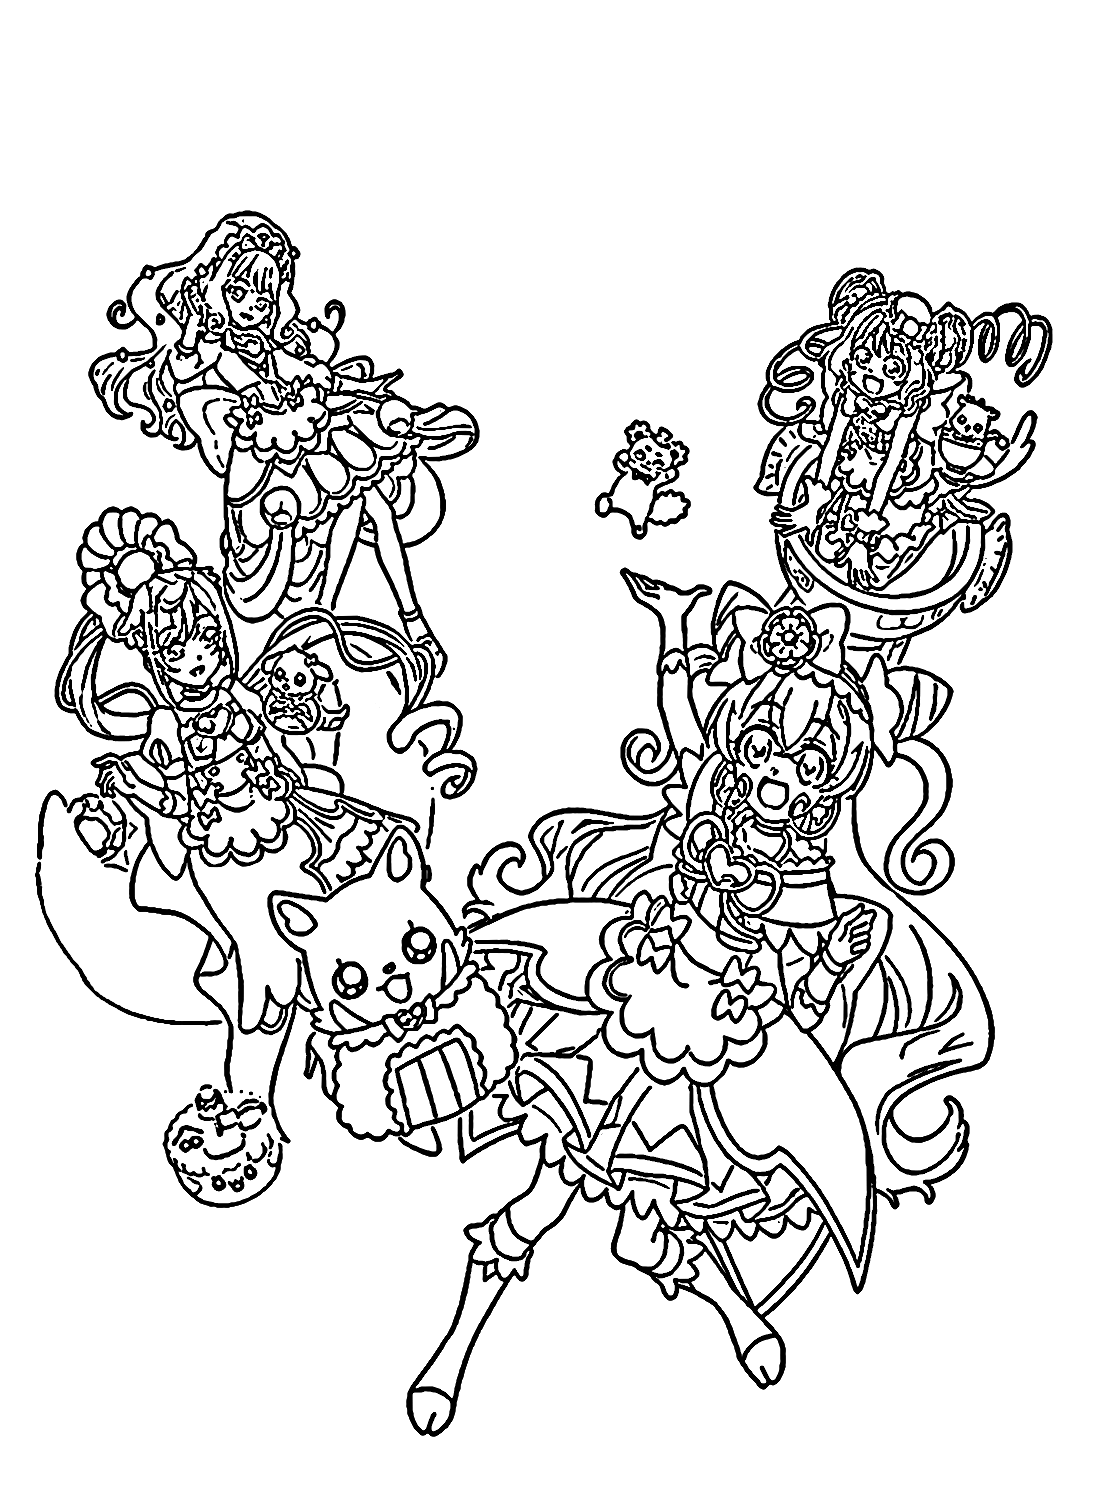 Delicious Party Pretty Cure Free Coloring Page